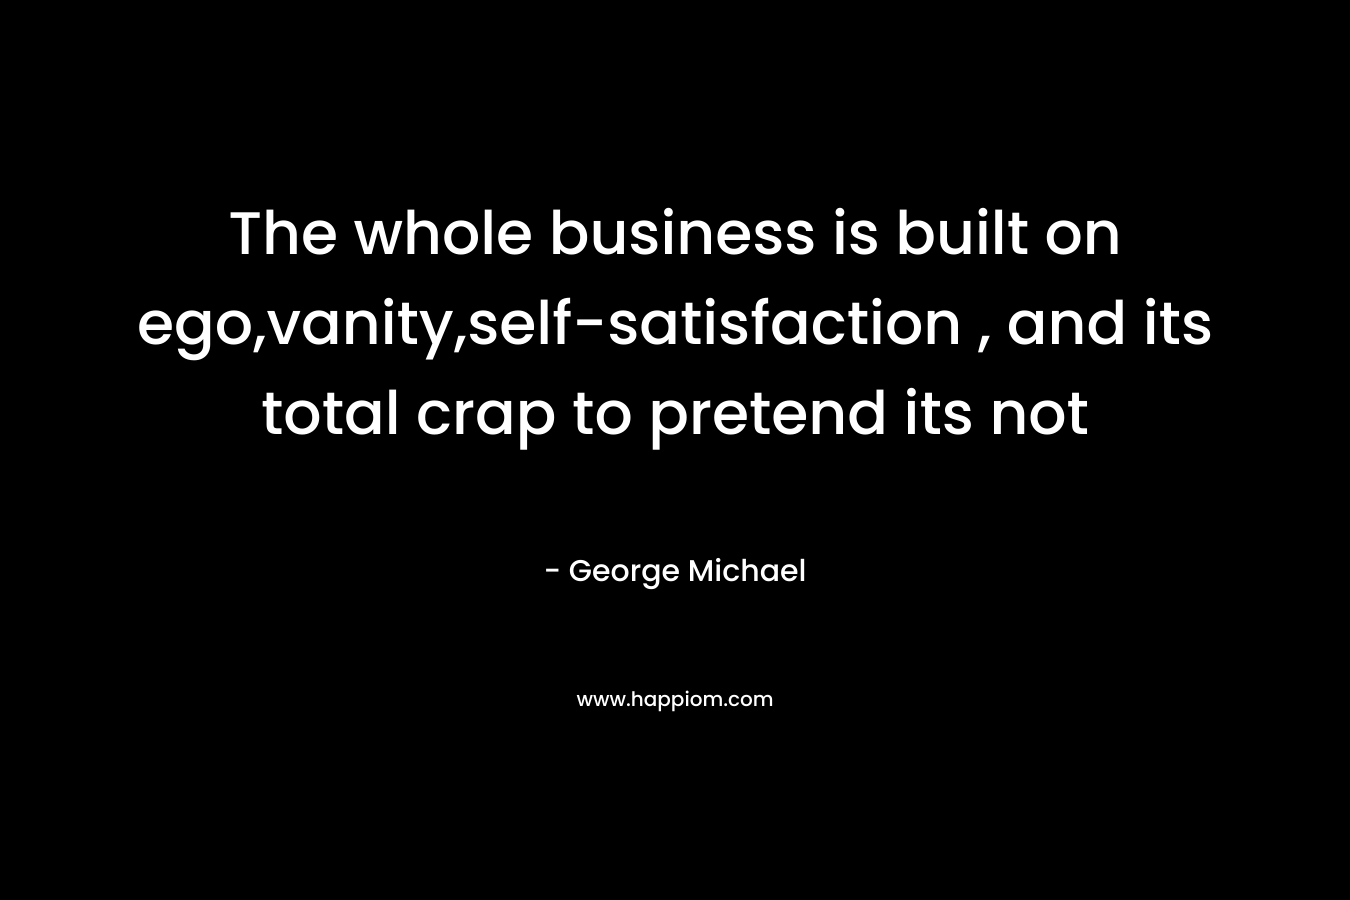 The whole business is built on ego,vanity,self-satisfaction , and its total crap to pretend its not